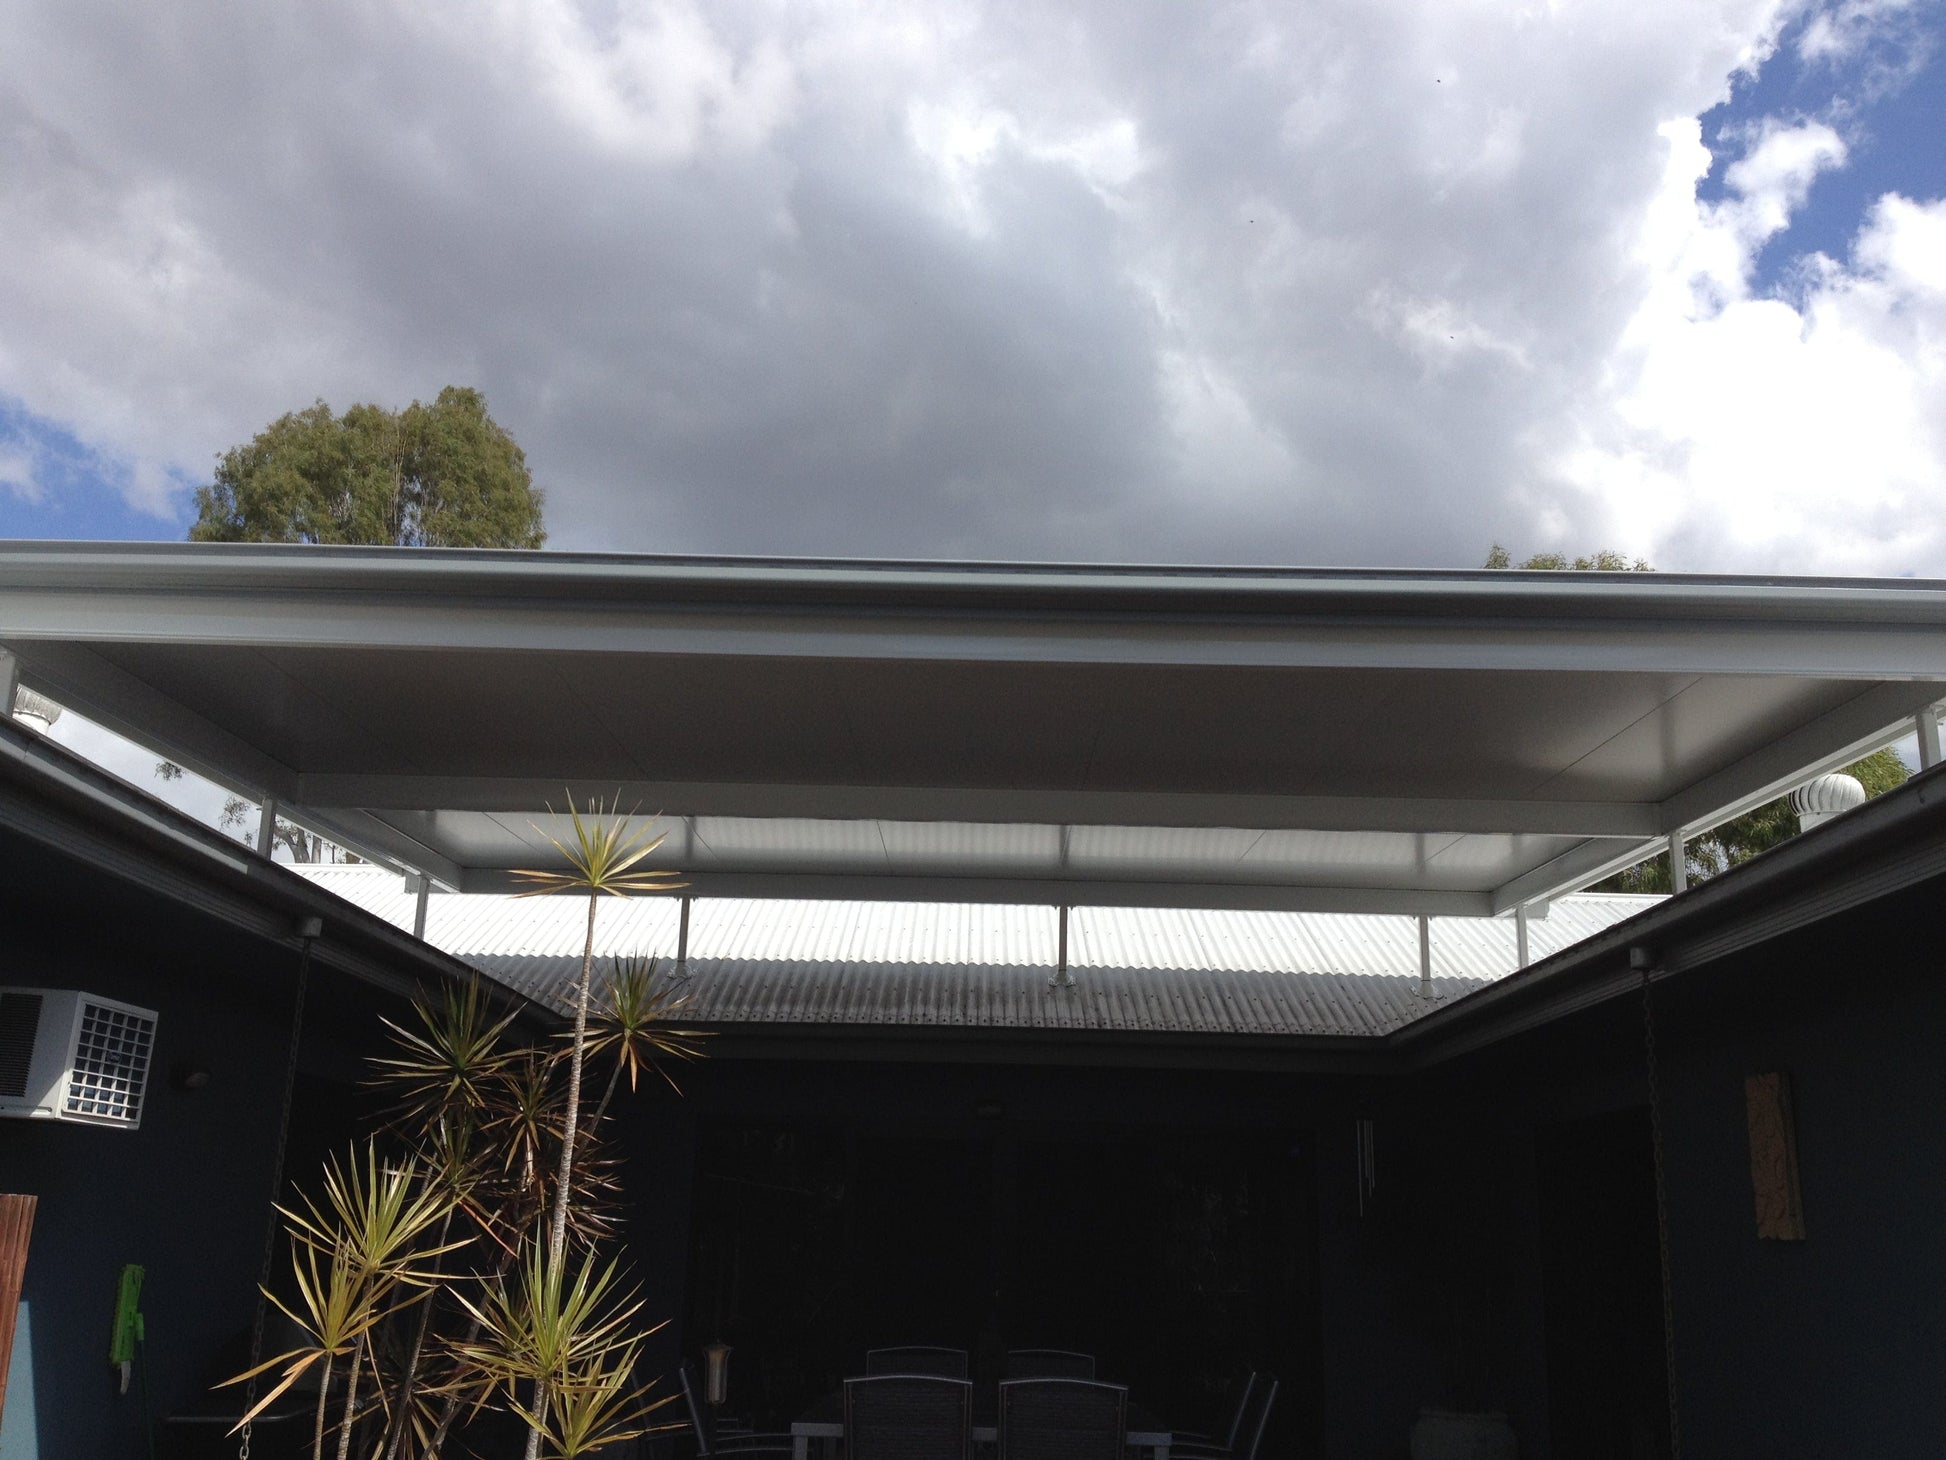 Insulated Flyover Patio Roof- 10m x 4m- Supply & Install QHI National